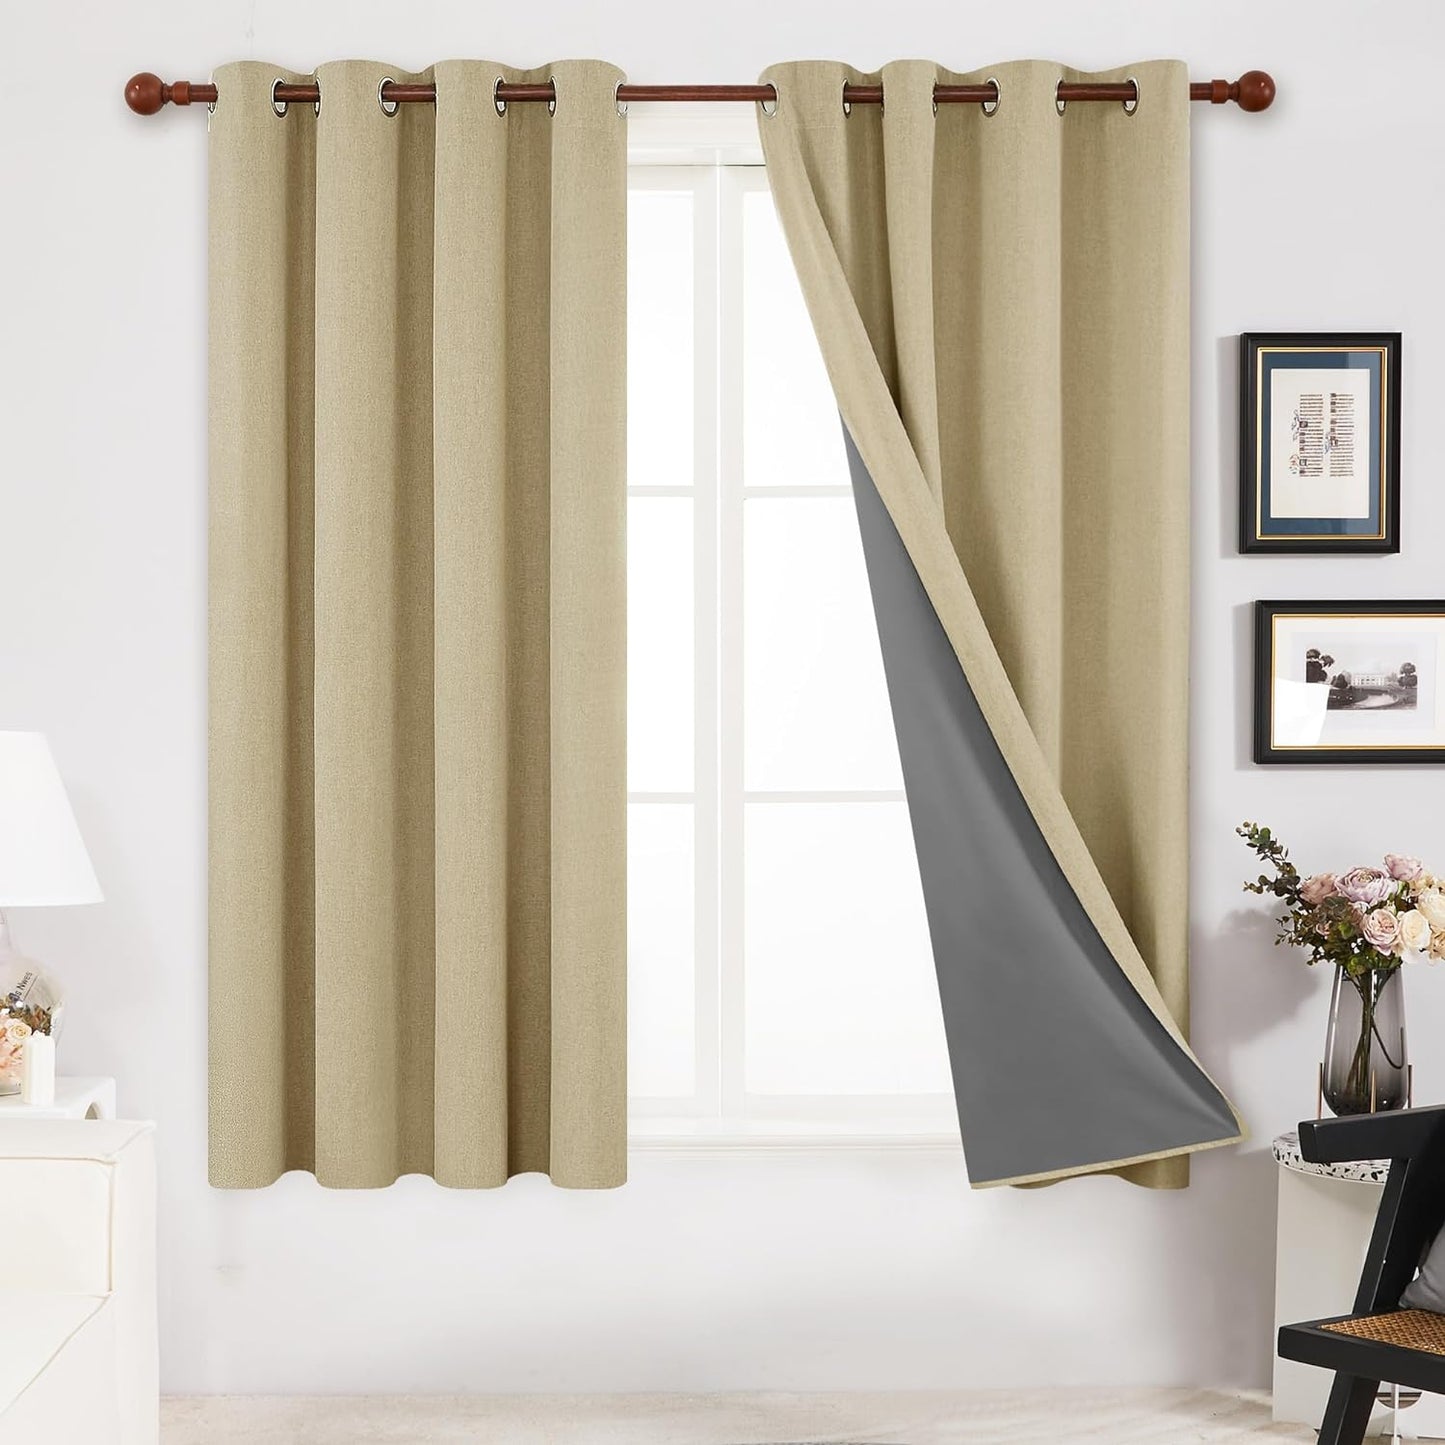 Deconovo Linen Blackout Curtains 84 Inch Length Set of 2, Thermal Curtain Drapes with Grey Coating, Total Light Blocking Waterproof Curtains for Indoor/Outdoor (Light Grey, 52W X 84L Inch)  Deconovo Beige 52X45 Inches 